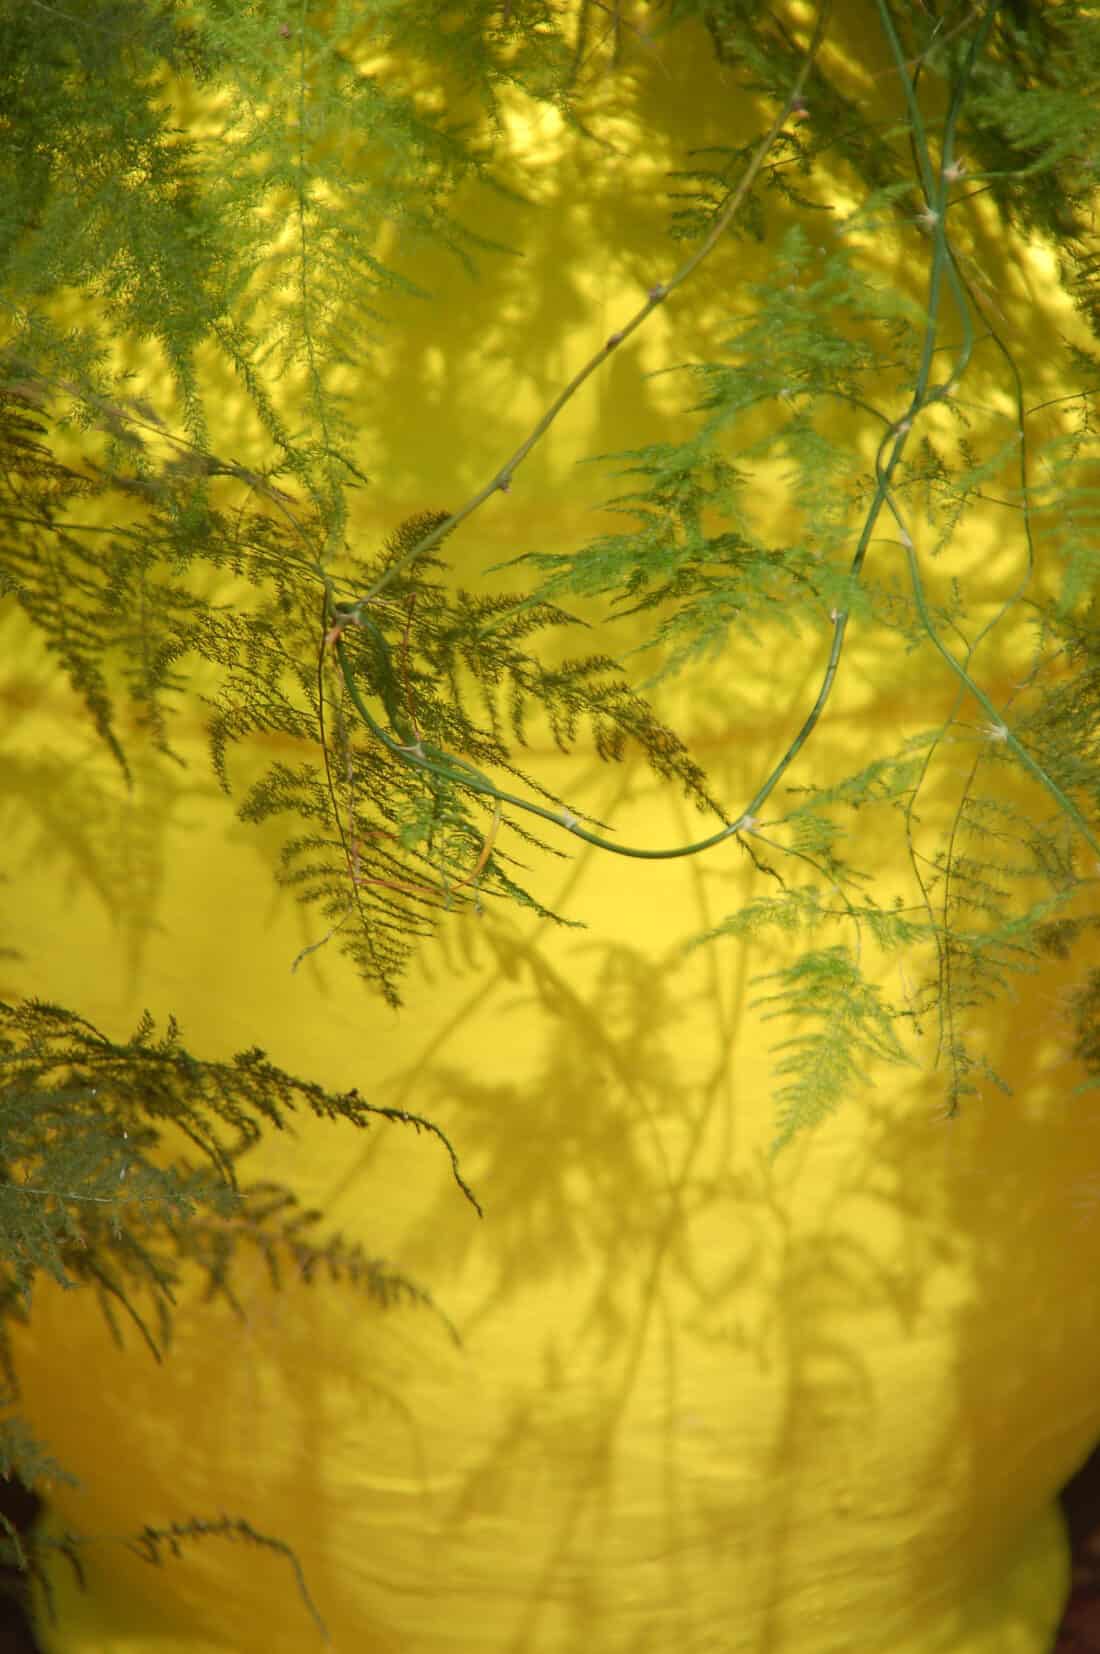 Delicate green fern leaves set against a vibrant yellow background in the Majorelle Garden.